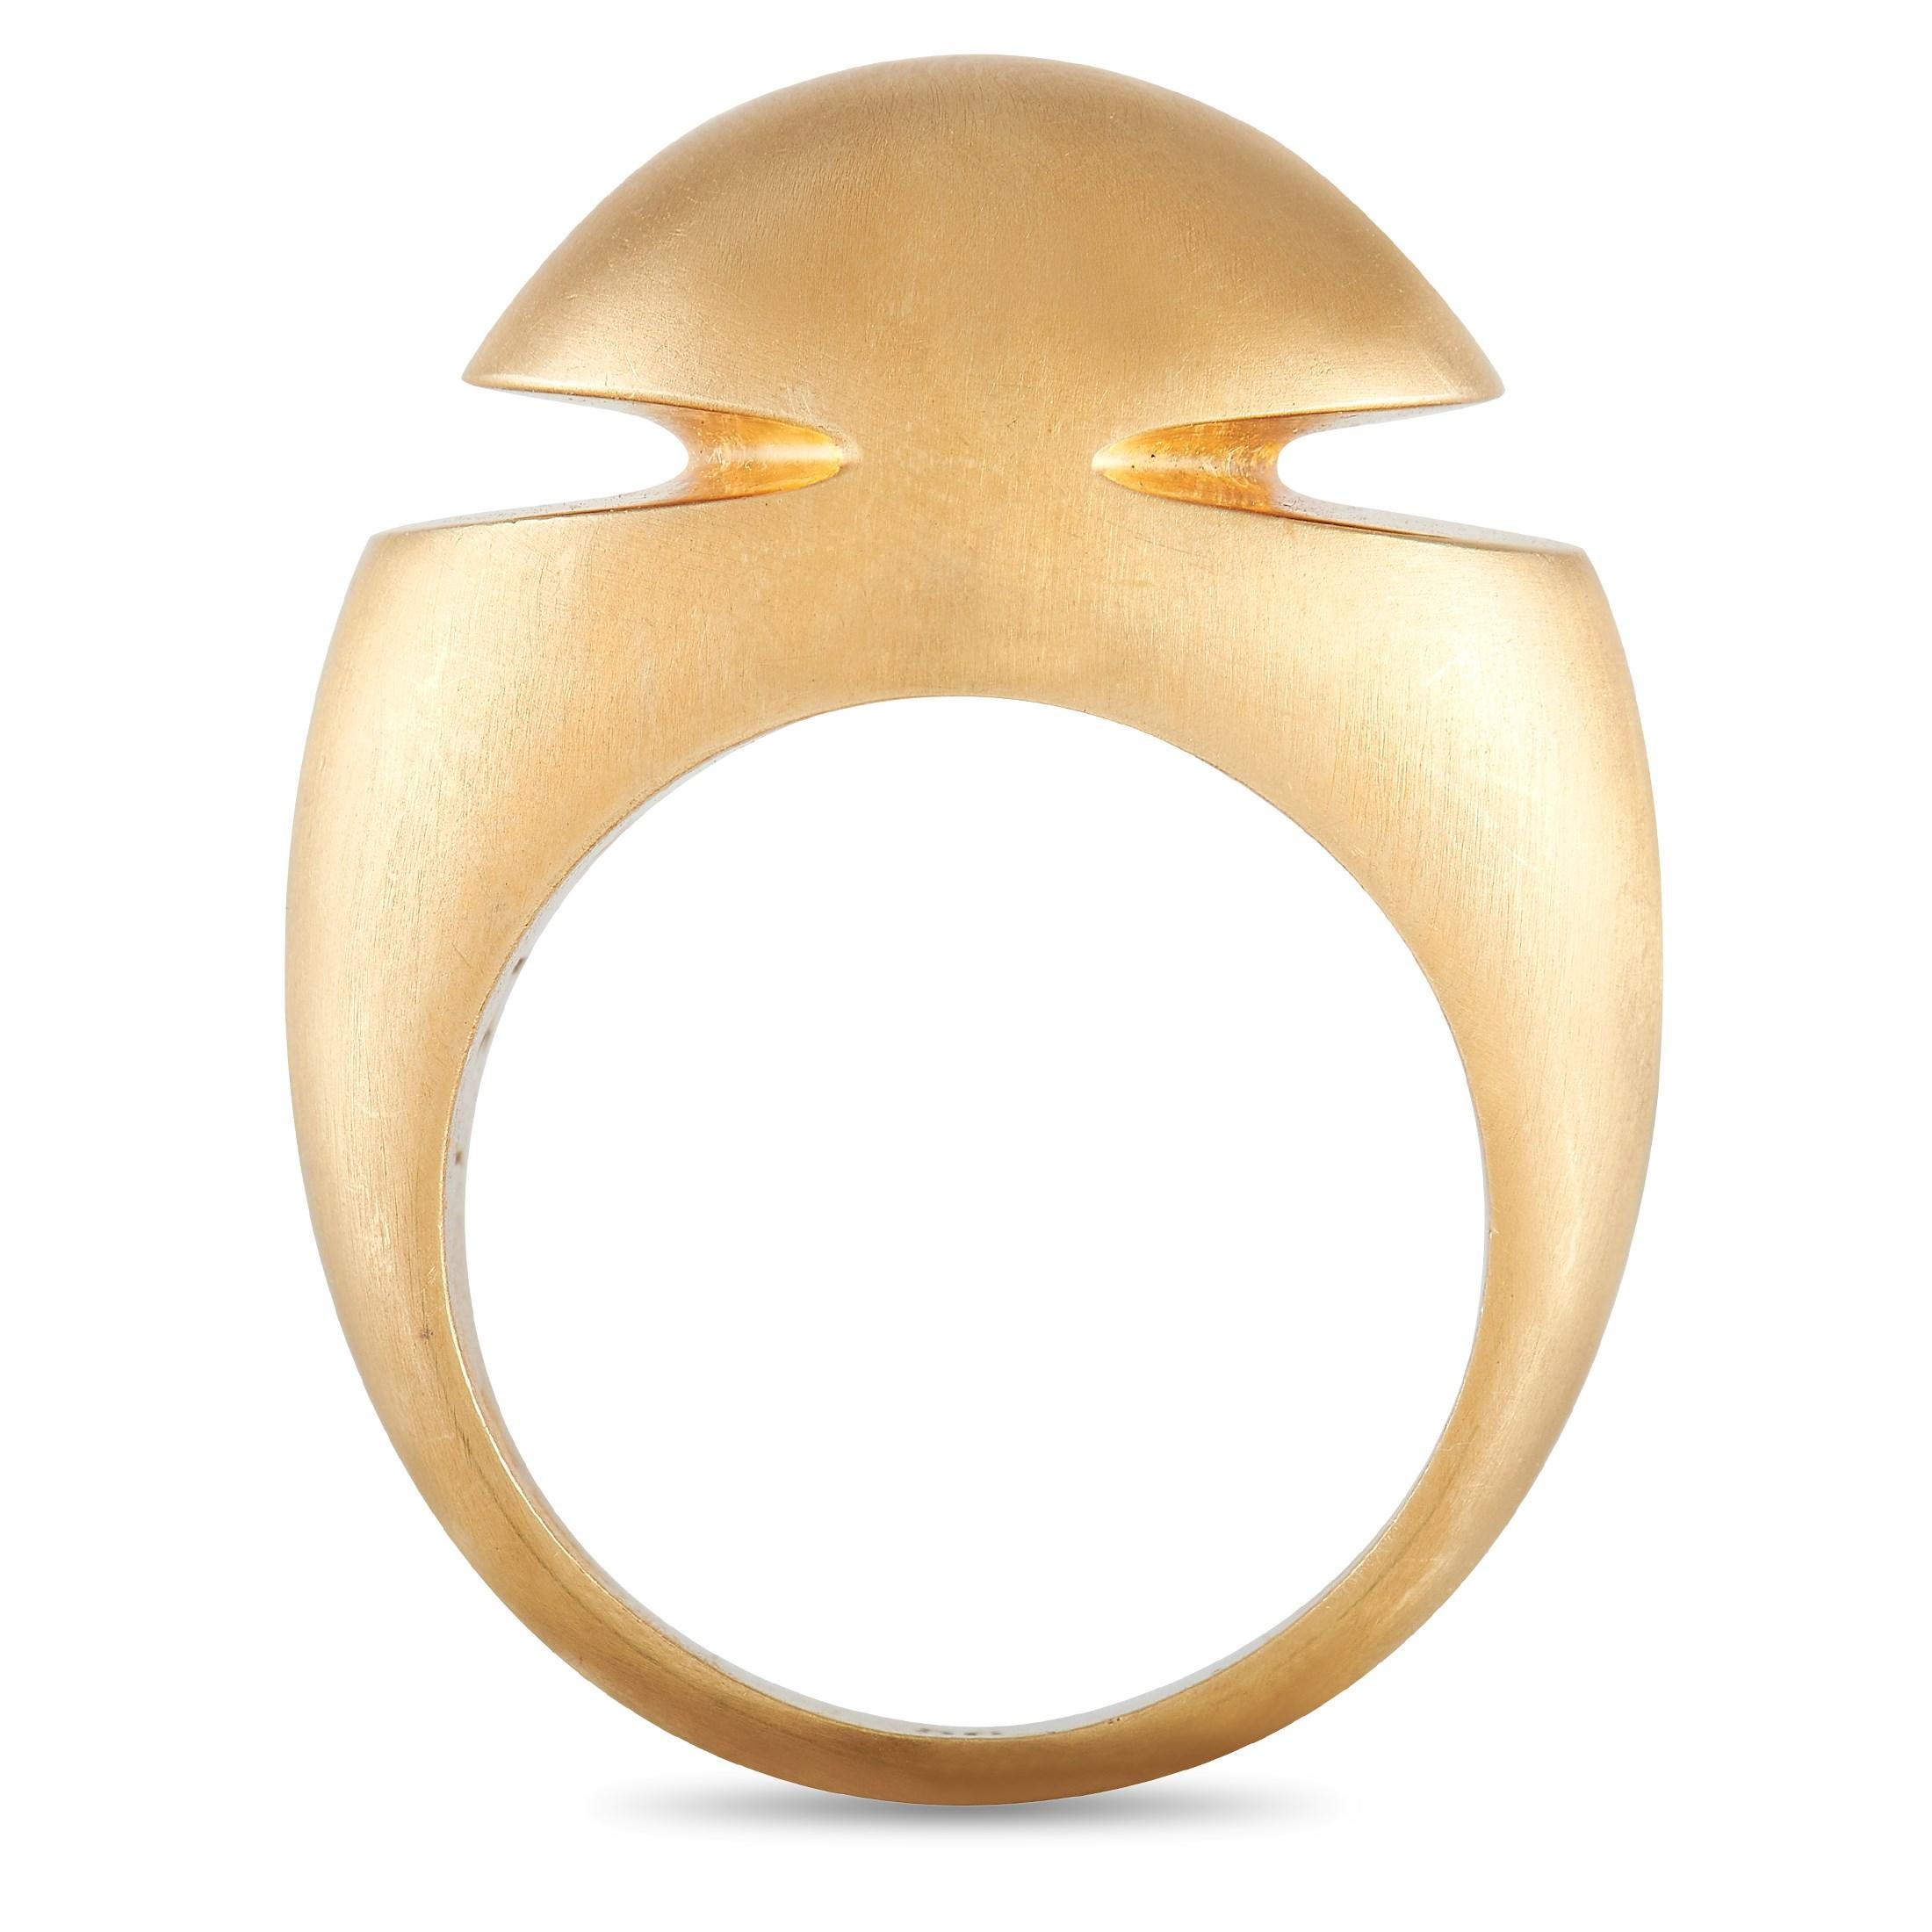 This 18K Rose Gold ring from Bvlgari celebrates the beauty of simplicity. Cut-out accents elevate this design’s sleek sense of sophistication. It features an 8mm wide band and an 11mm top height. 